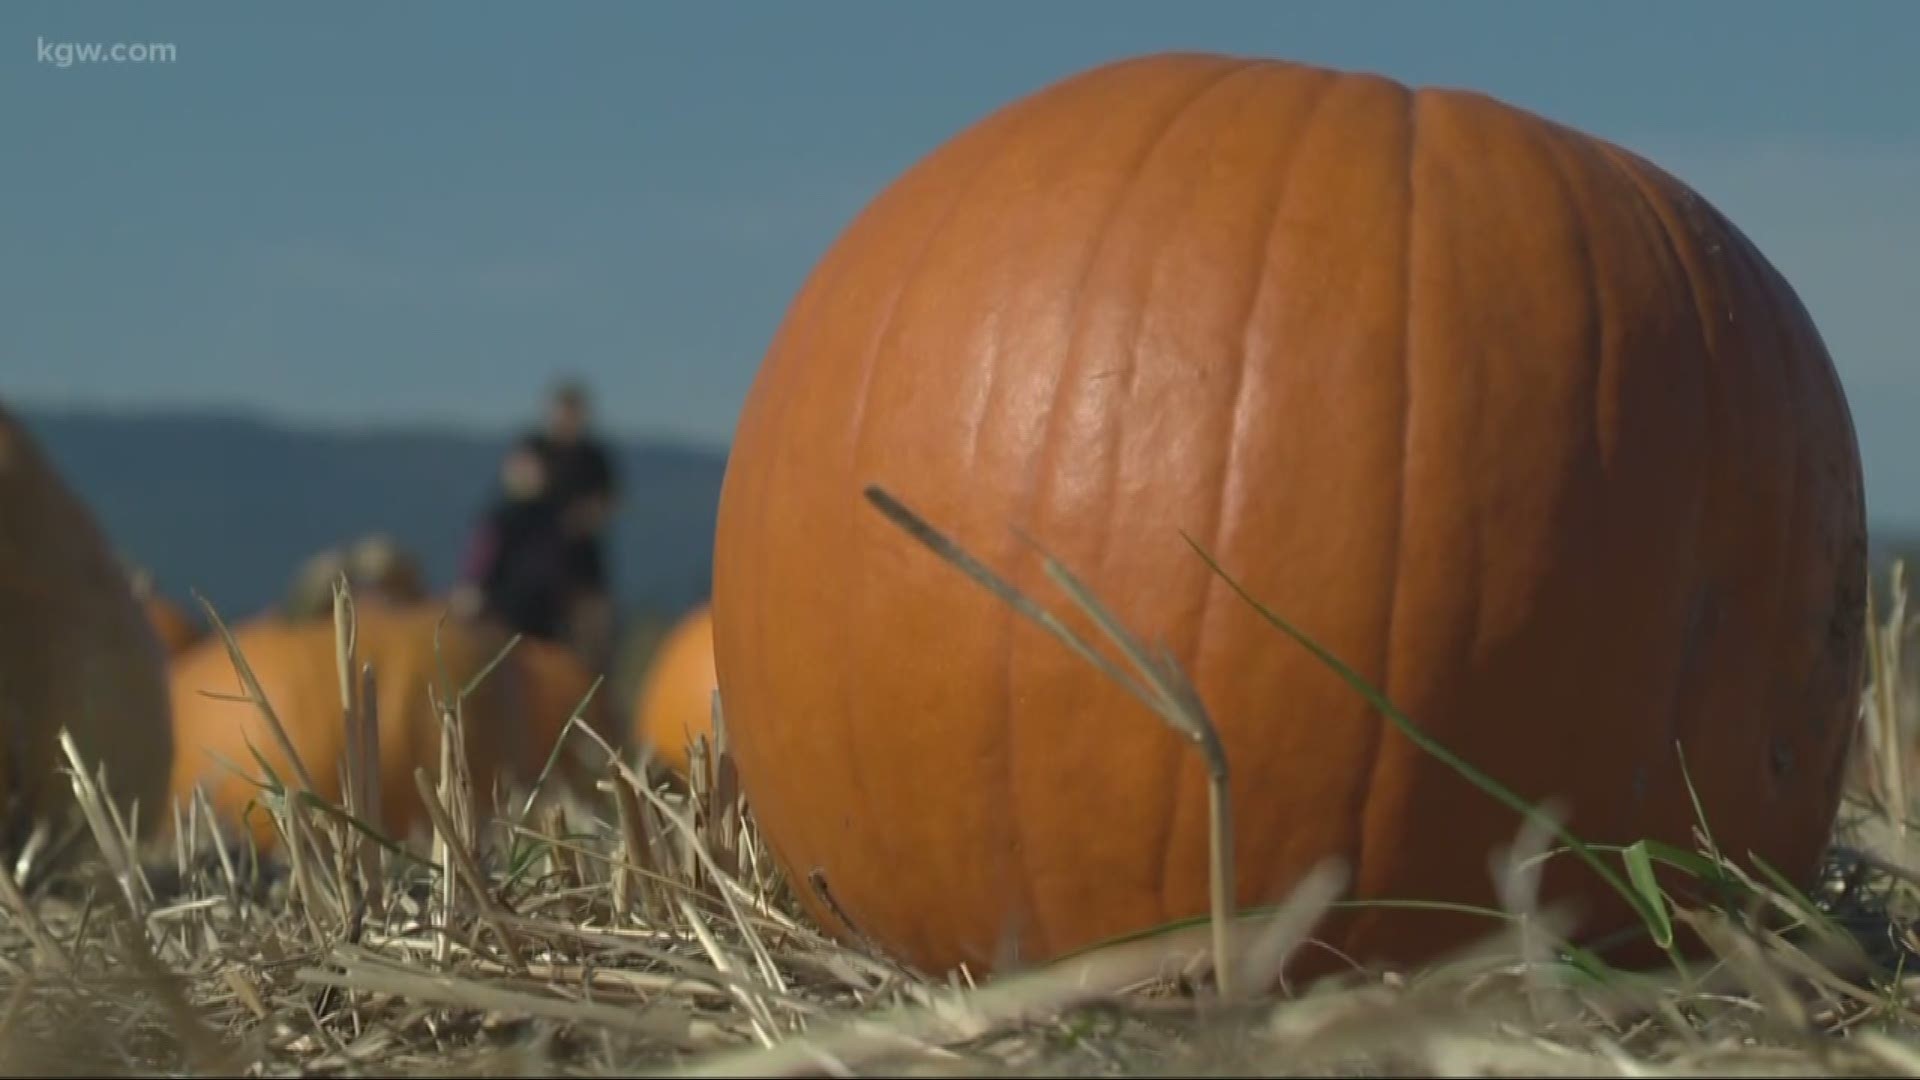 Pumpkin farms are seeing plenty of patrons this fall.